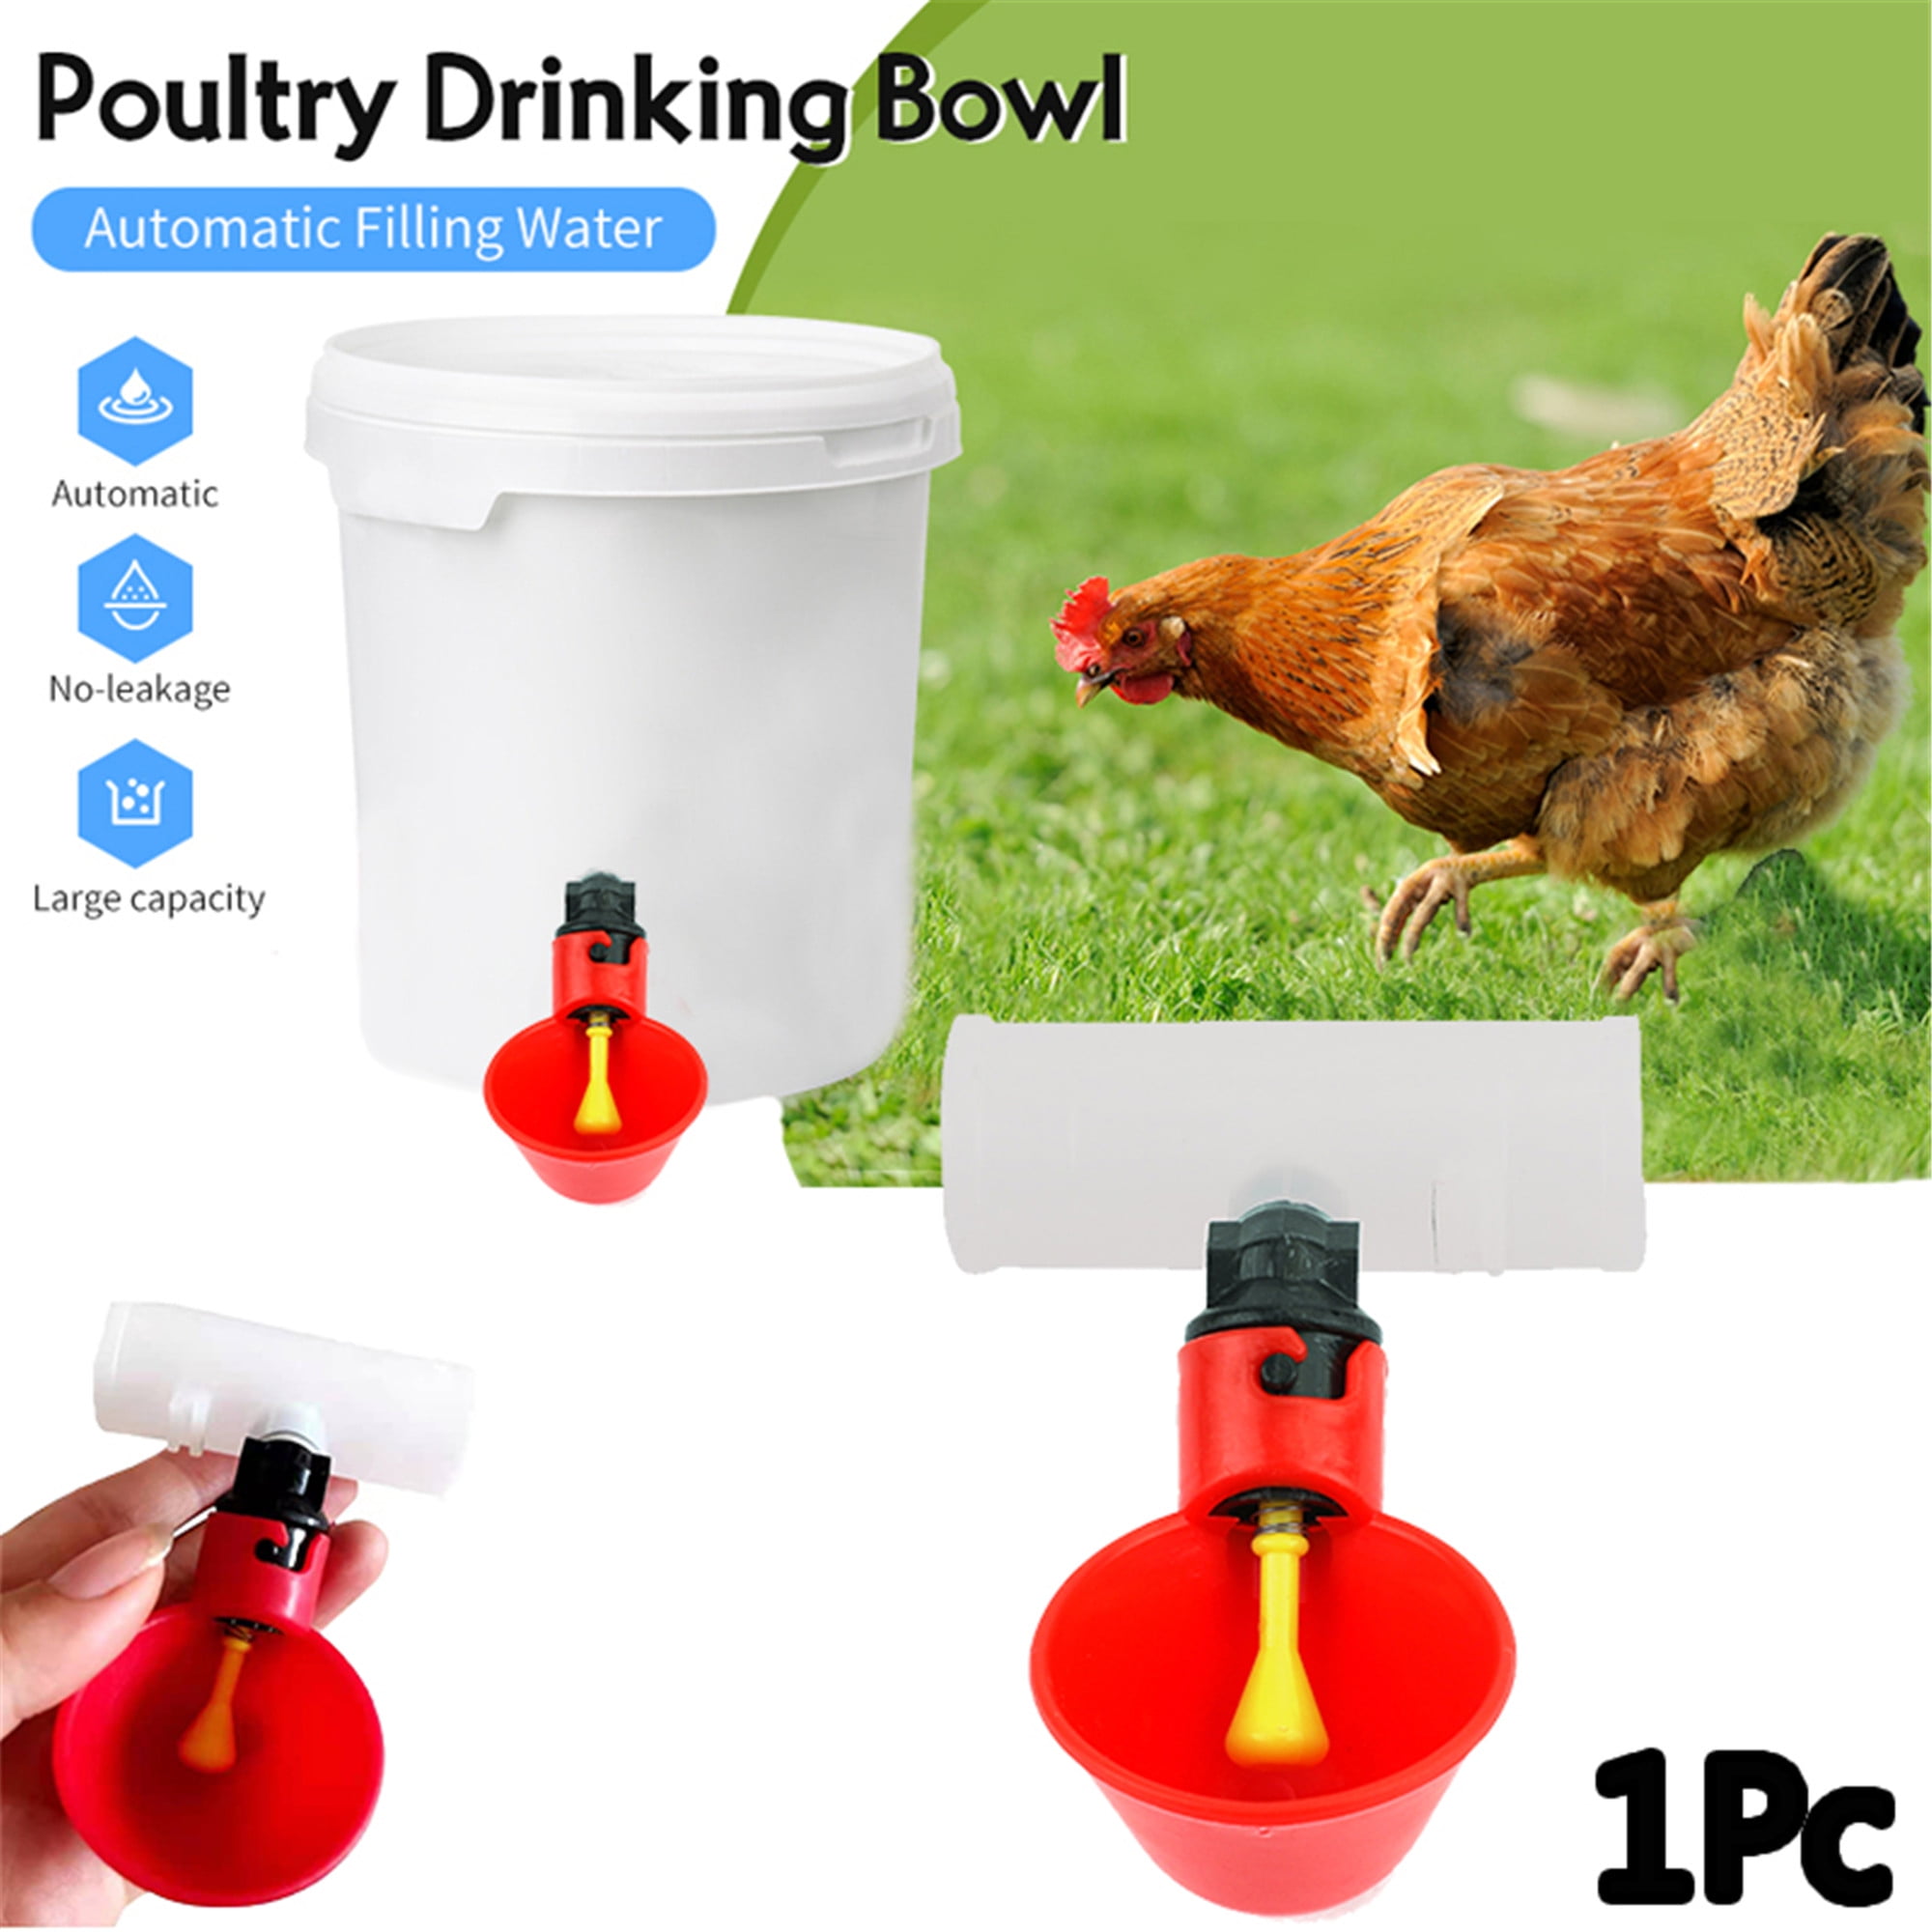 AUTOMATIC WATERER DRINKER CUPS & 1/2" PVC TEE FITTING CHICKEN WATER POULTRY 20 